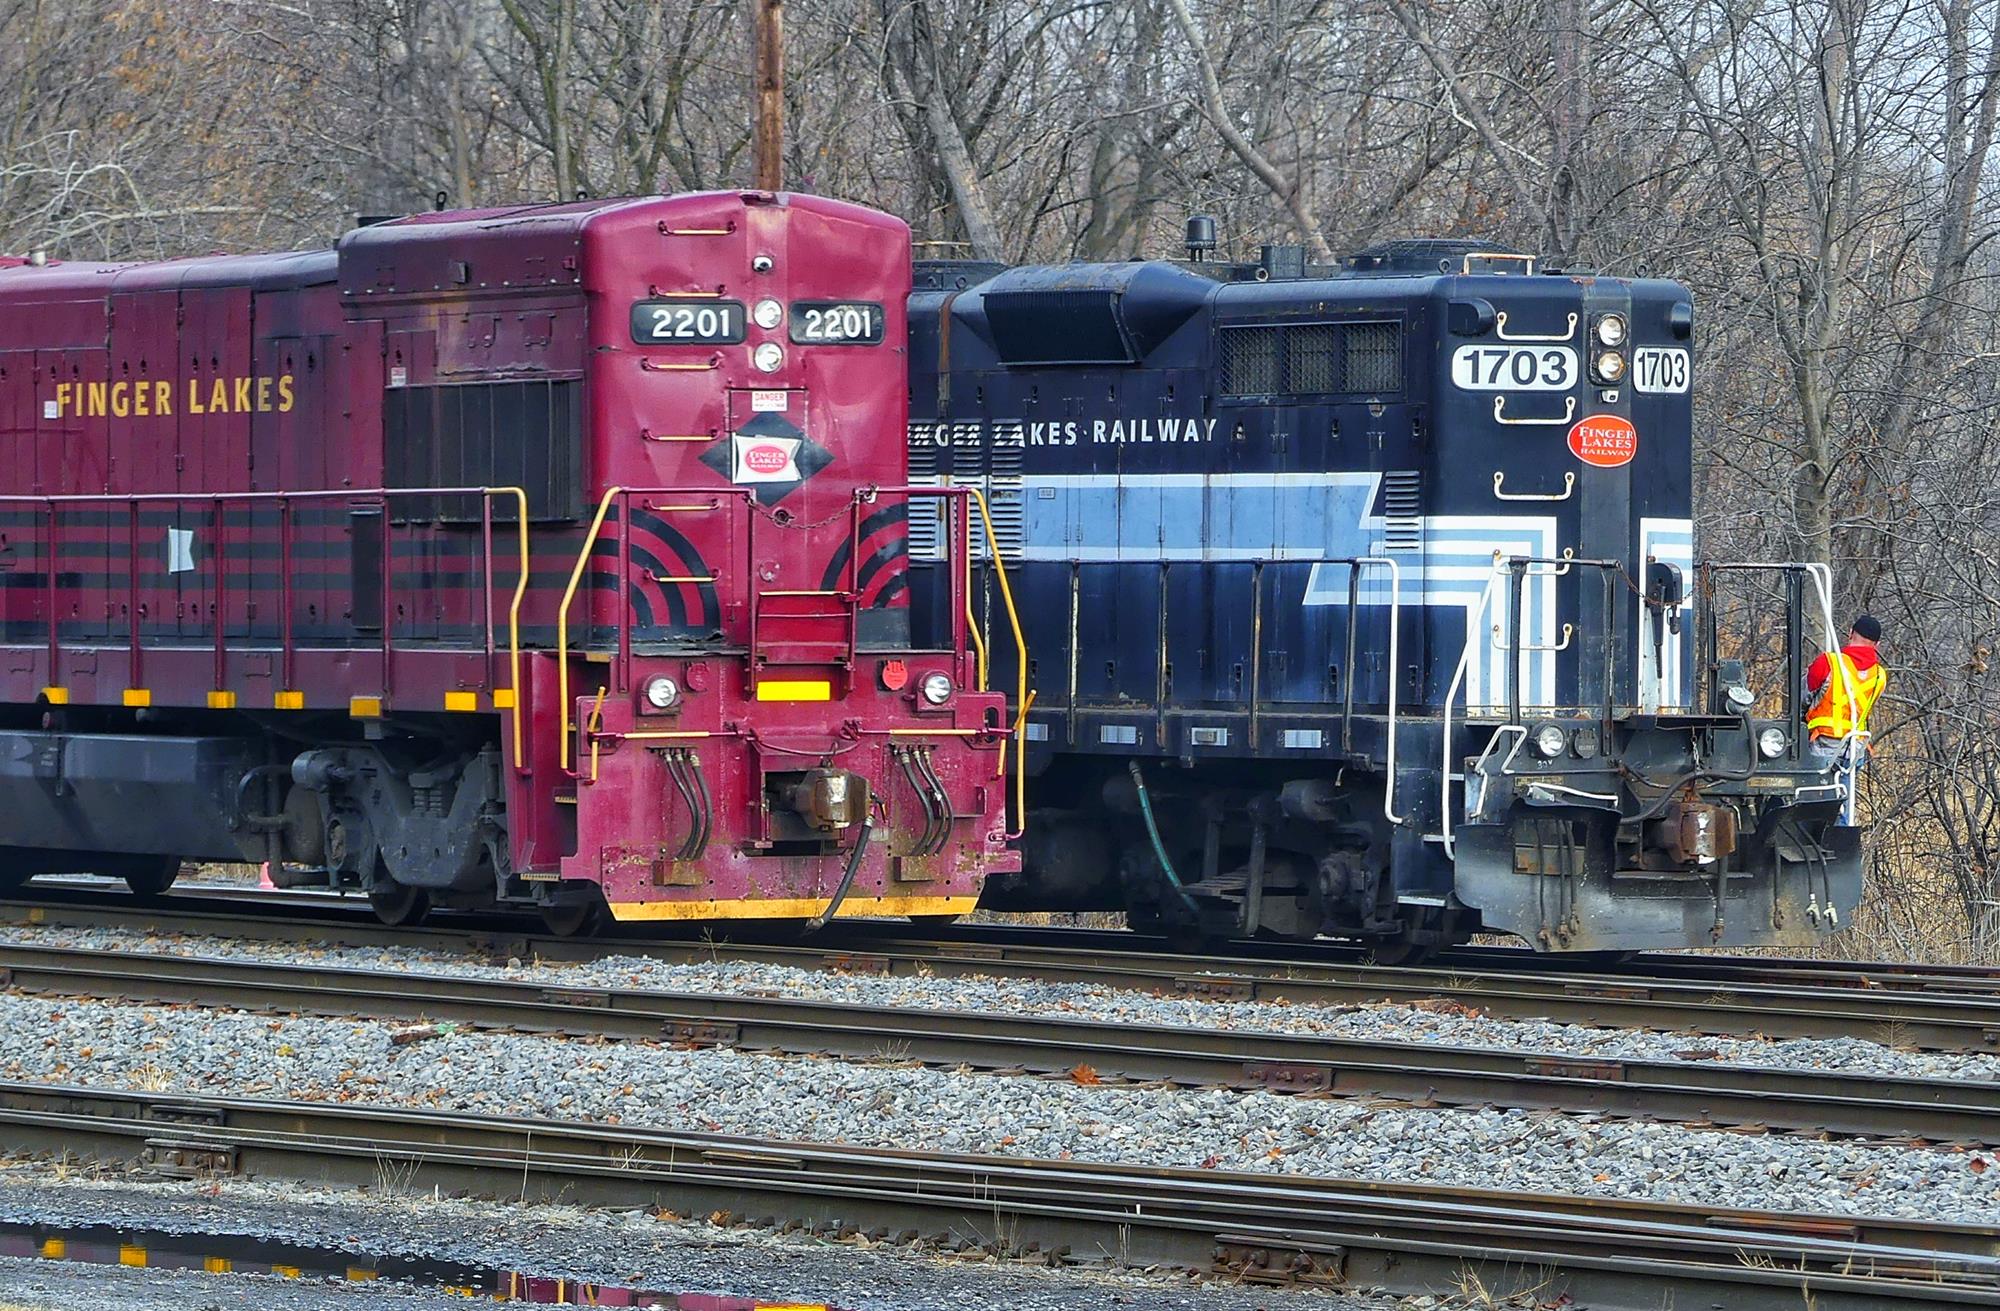 FGLK 2201 is a class GE U23B and  is pictured in Geneva , New York, USA.  This was taken along the Finger Lakes Railway  on the Finger Lakes Railway. Photo Copyright: Scott  Murnan  uploaded to Railroad Gallery on 01/05/2023. This photograph of FGLK 2201 was taken on Monday, January 02, 2023. All Rights Reserved. 